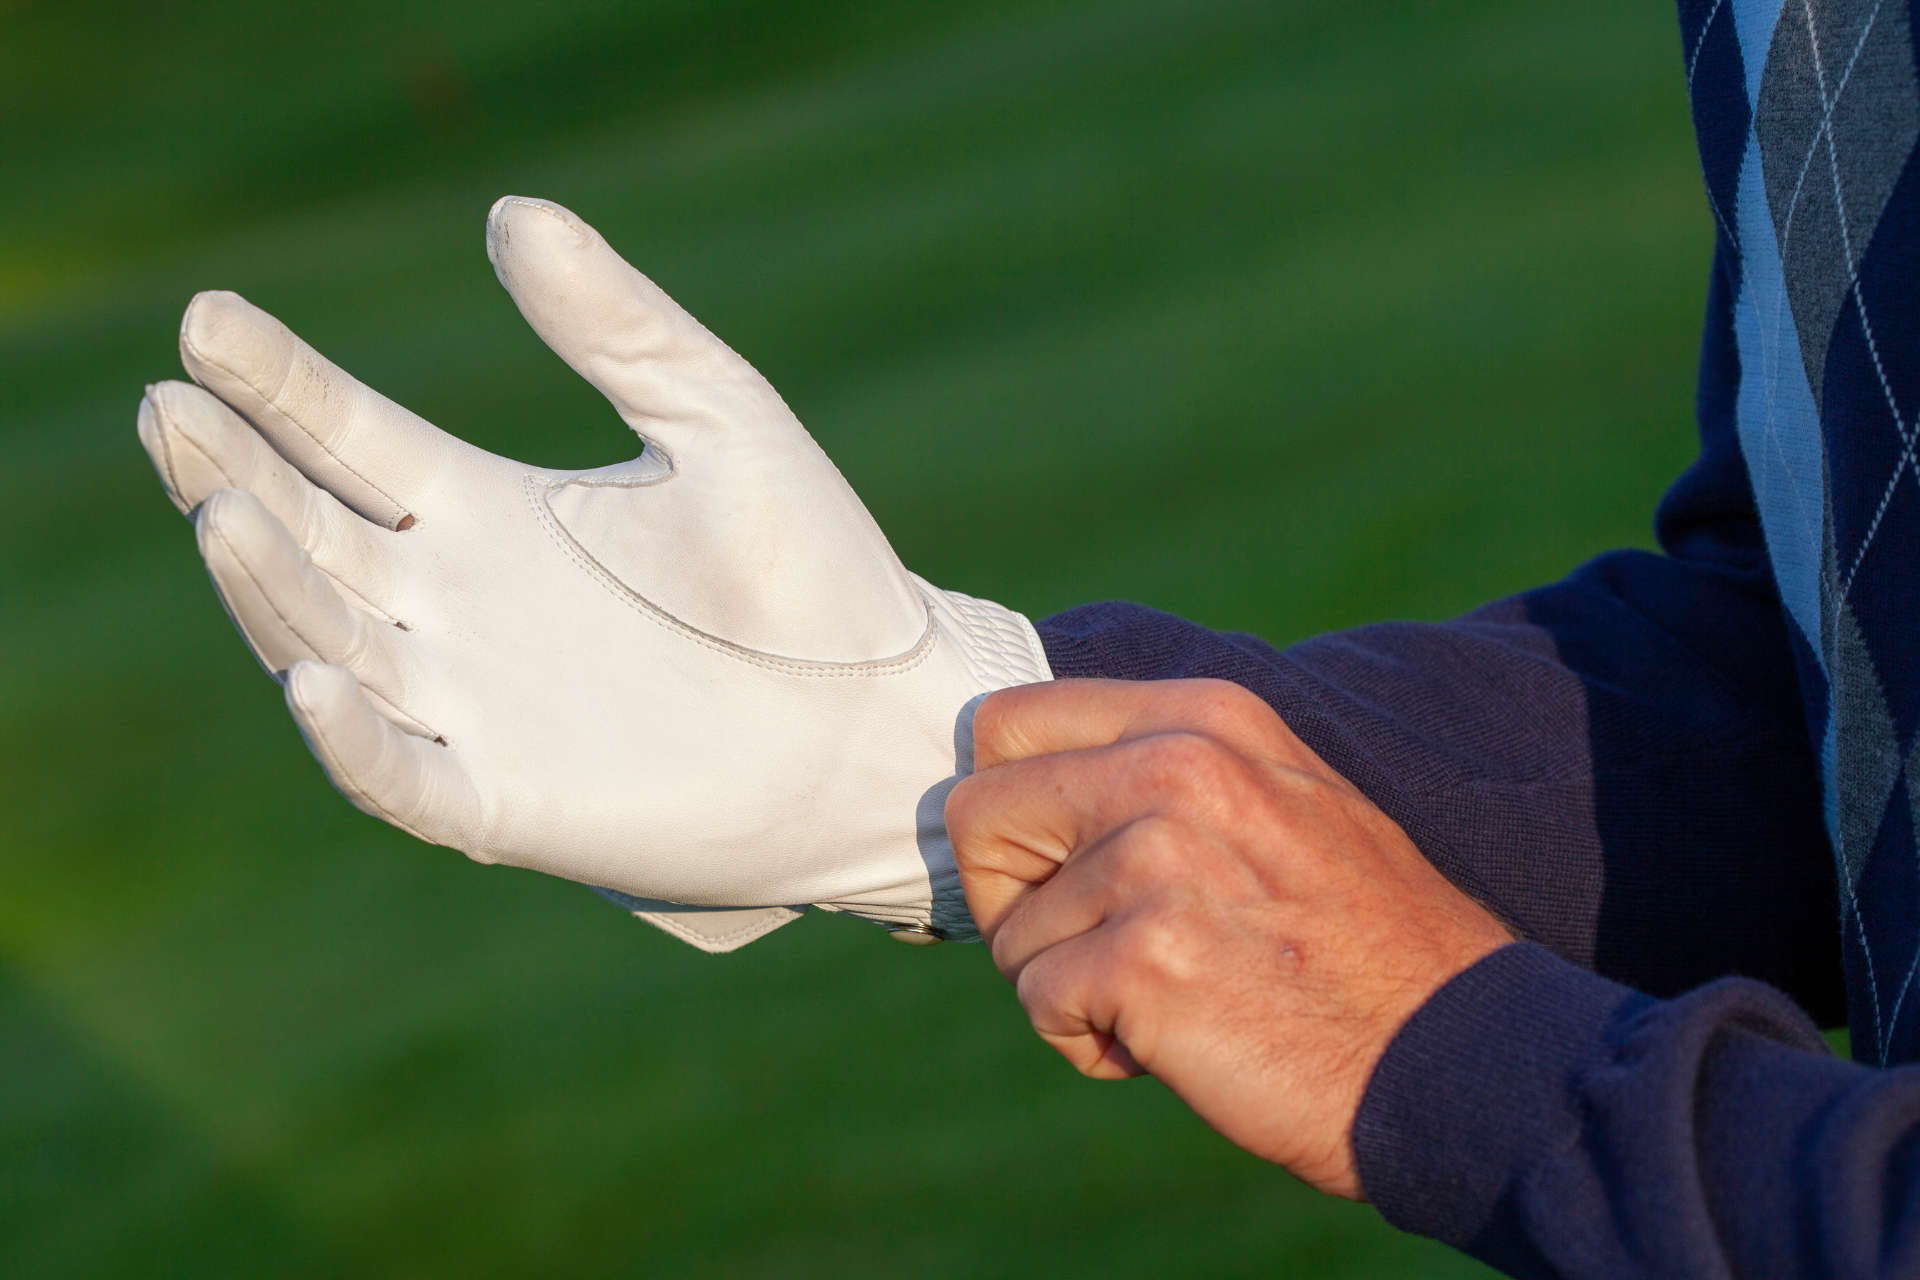 The Ultimate Guide: How to Wash Your Golf Gloves